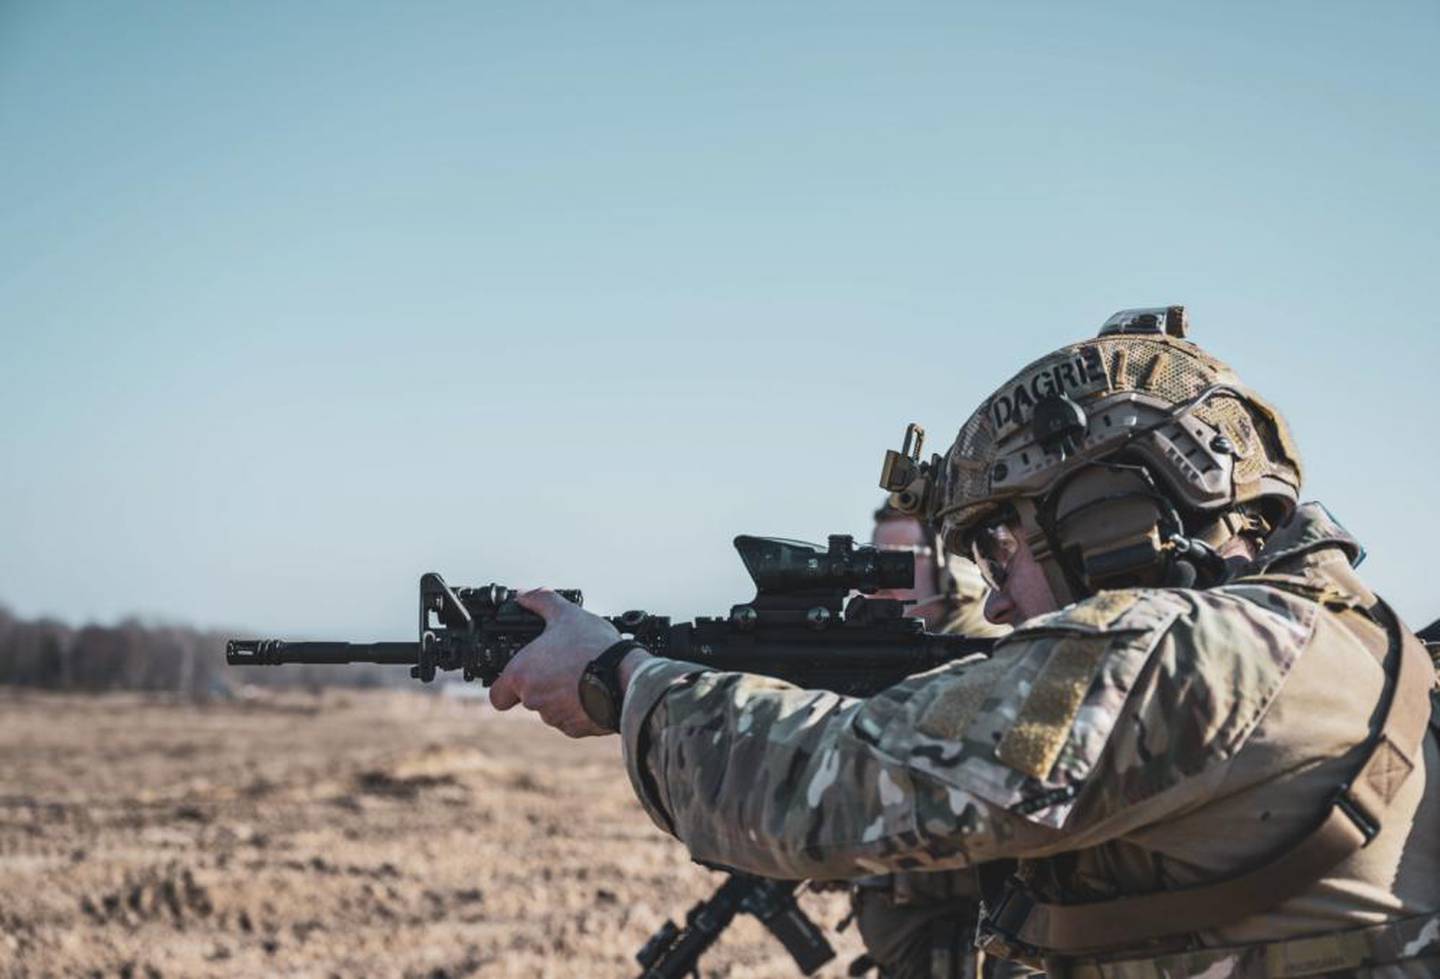 A U.S. Air Force deployed aircraft ground response element airman assigned to the 352nd Special Operations Wing fires a M4 rifle during readiness training in Poland, March 2, 2022. United States Special Operations Command Europe is prepared and strategically positioned to rapidly provide support to NATO Allies and partners and defend against any aggression to maintain stability and security in Europe. (Staff Sgt. Izabella Workman/Air Force)